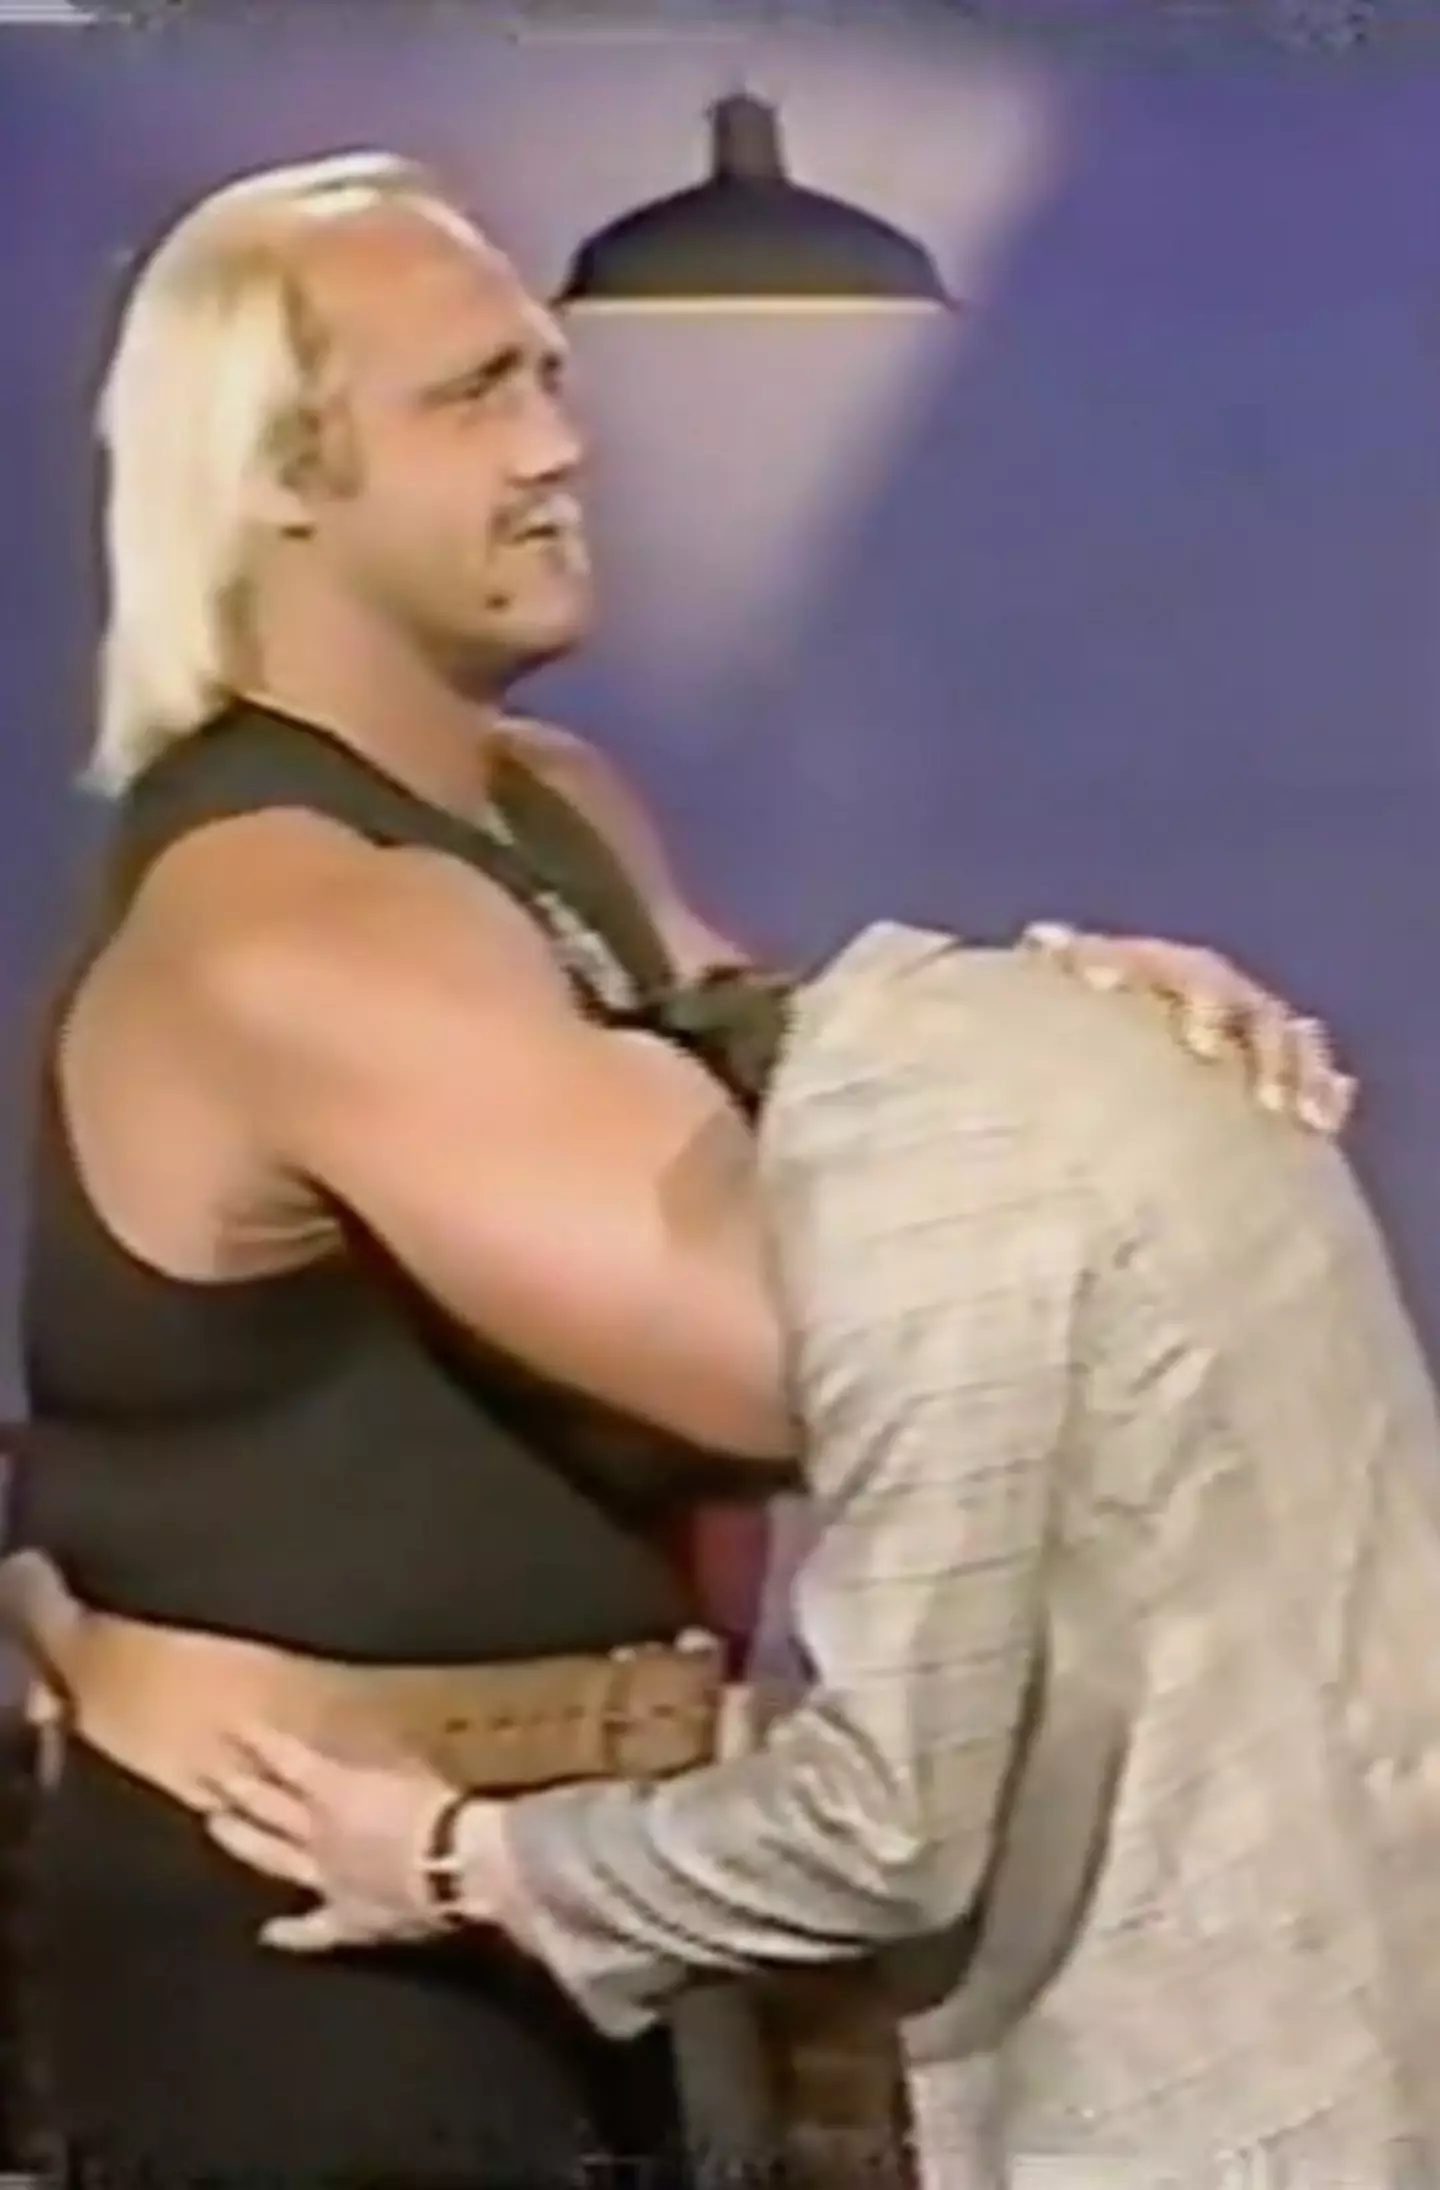 The host decided to challenge Hogan to a wrestling move.